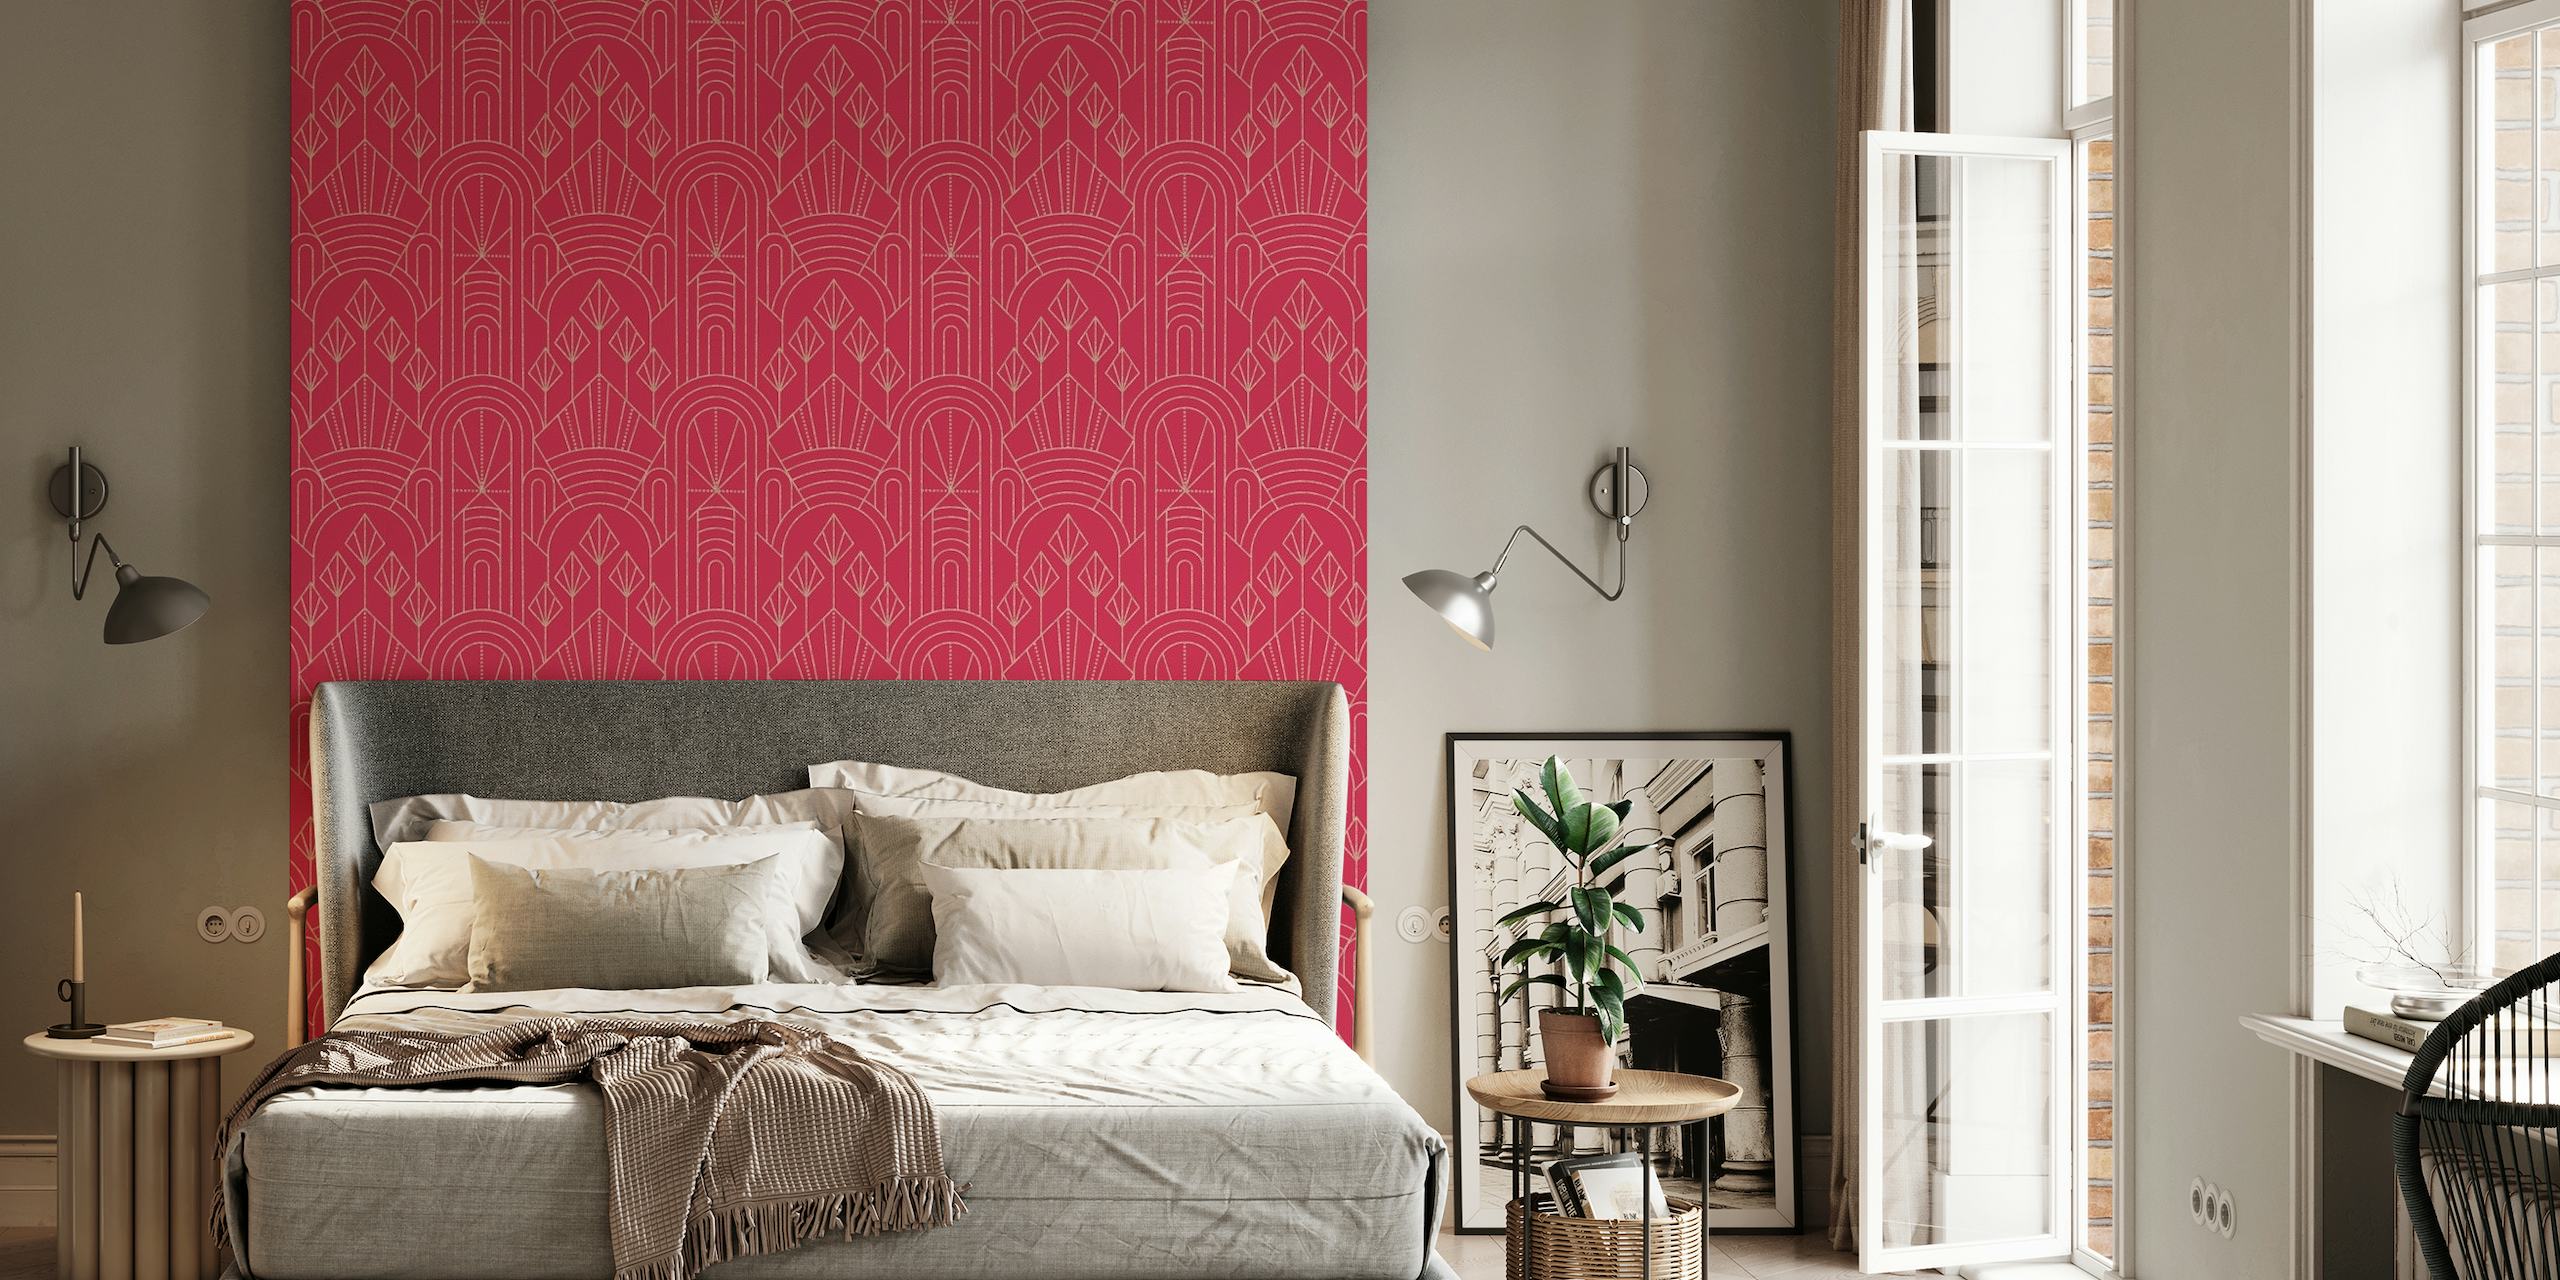 Viva Magenta Art Deco pattern wall mural featuring geometric and stylized floral motifs